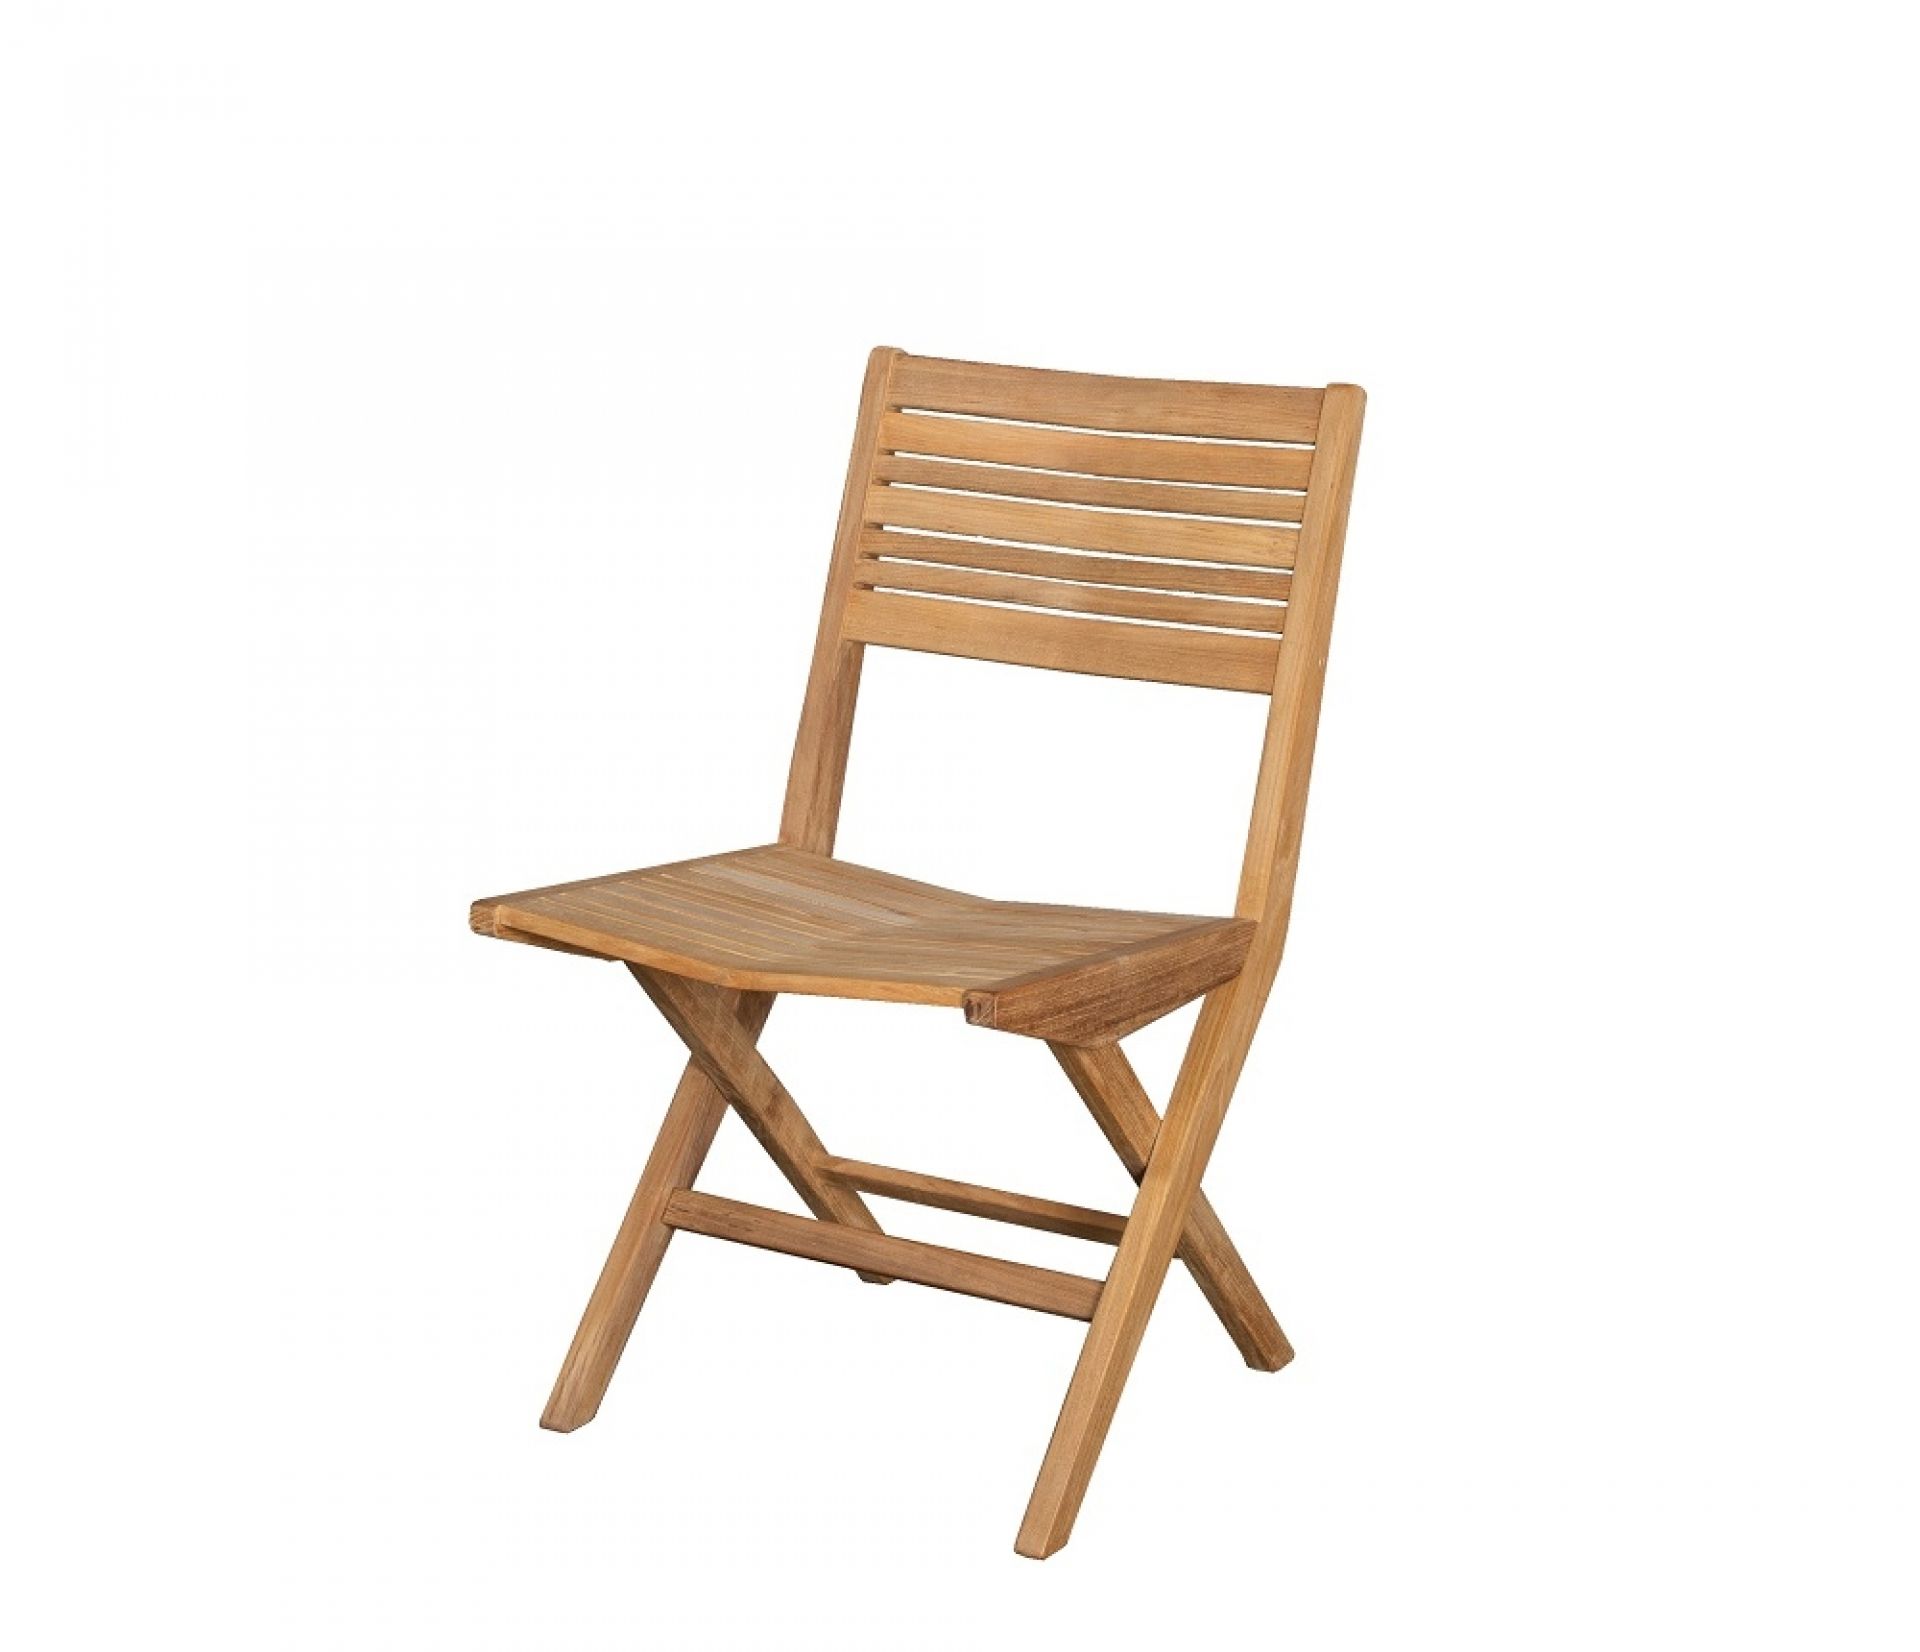 Flip Outdoor Folding Chair Set Of 2, Outdoor Wood Chairs Folding